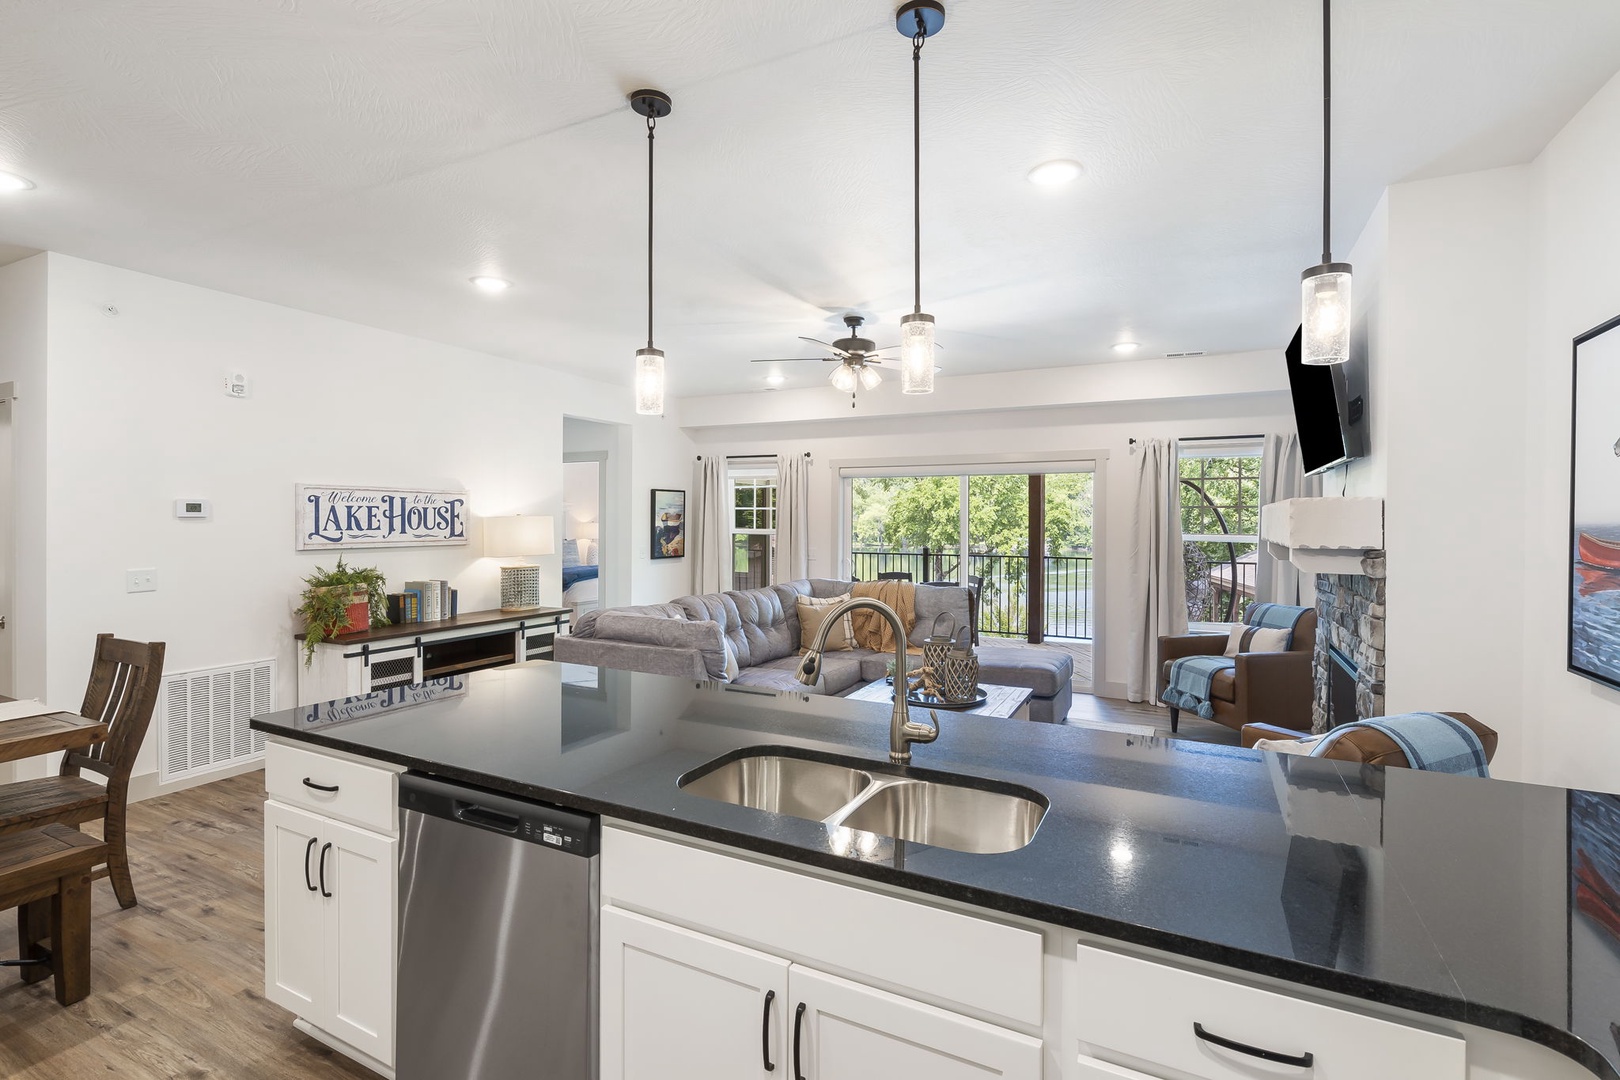 The open kitchen boasts ample counter/storage space and fantastic amenities